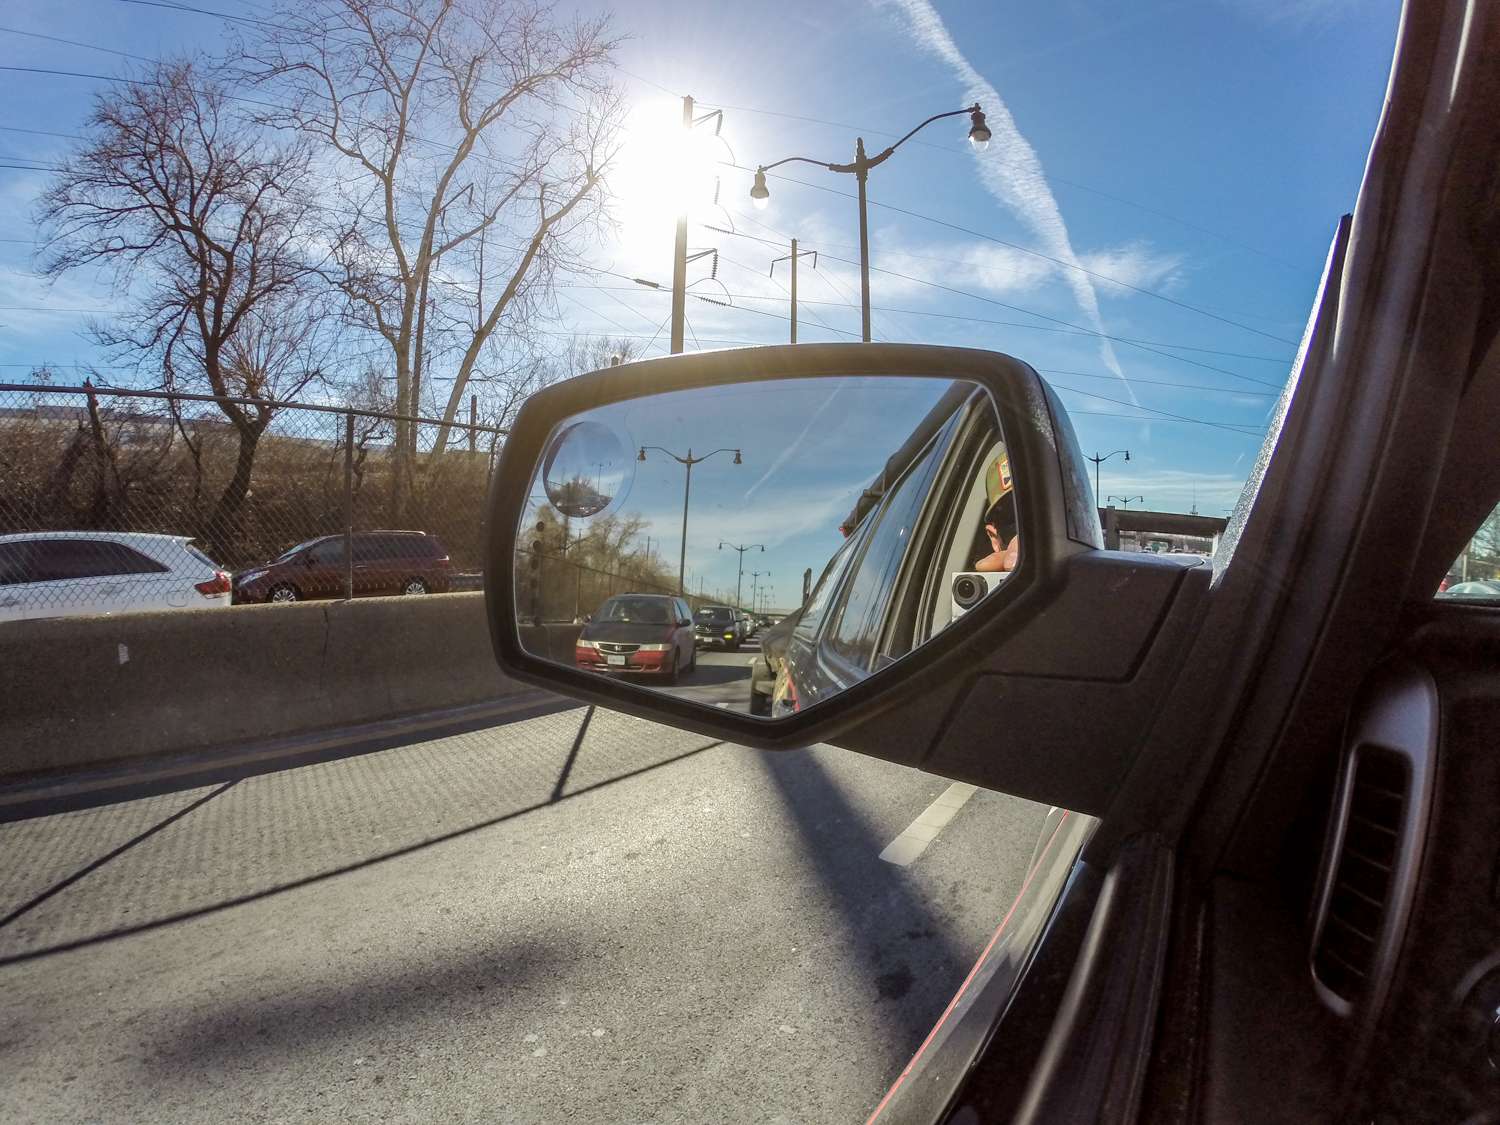 And the miles grow from the view in the side view mirror. 
